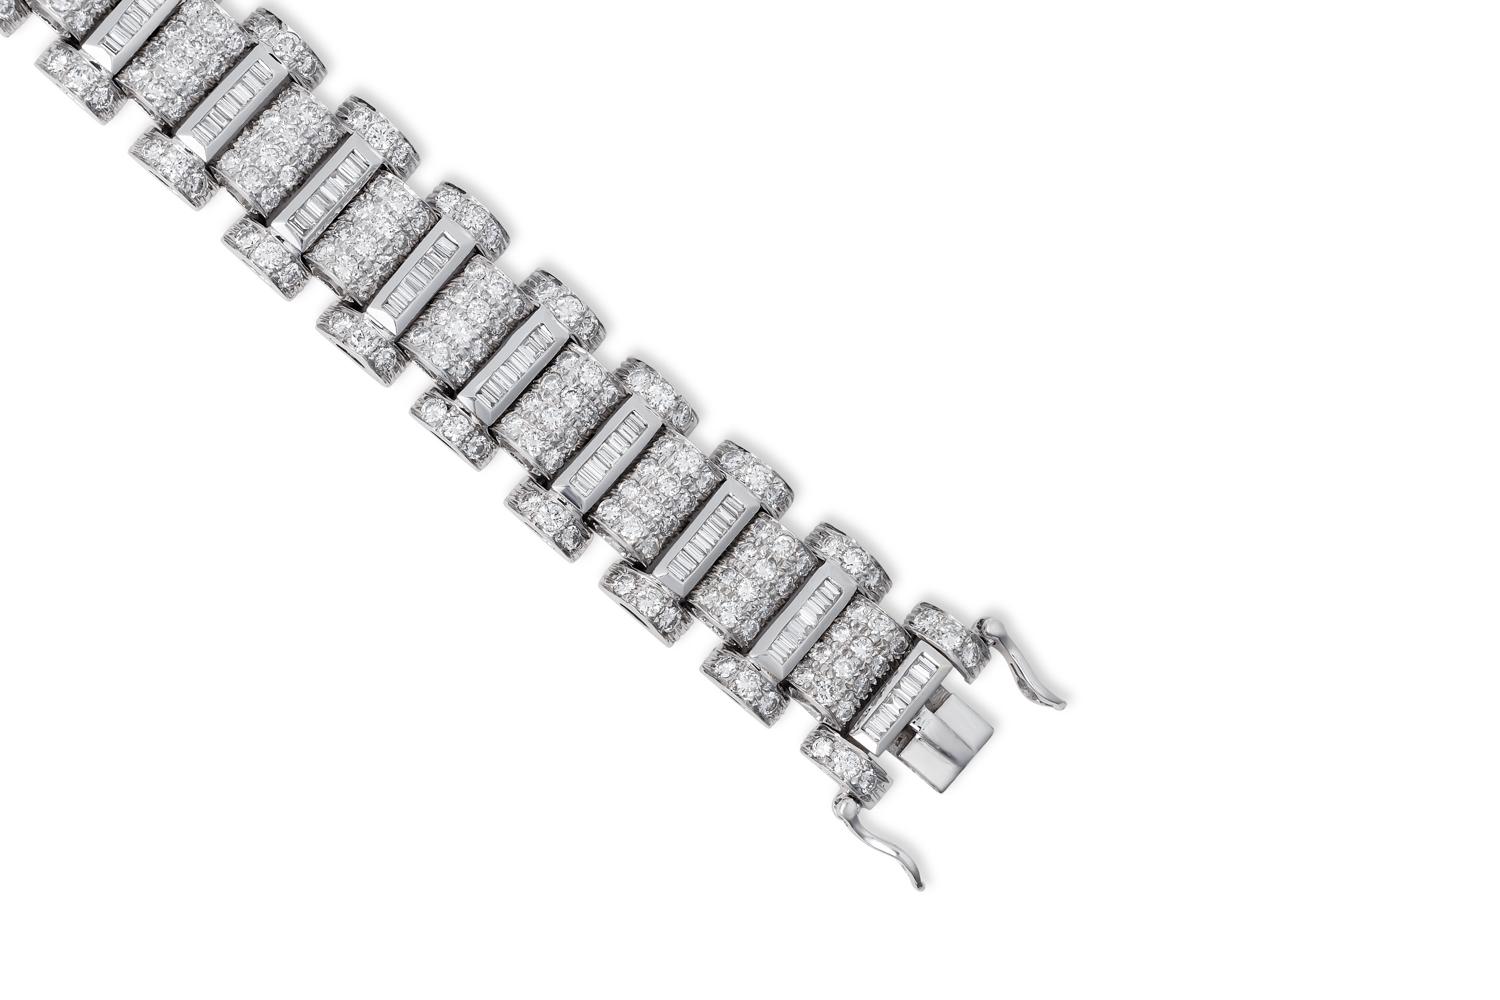 Elegance meets extravagance in our 18k White Gold Wide Diamond Bracelet, a stunning piece destined to adorn your wrist with unparalleled beauty. This 7-inch masterpiece boasts a total diamond weight of 14.92 carats, featuring diamonds of G-H color